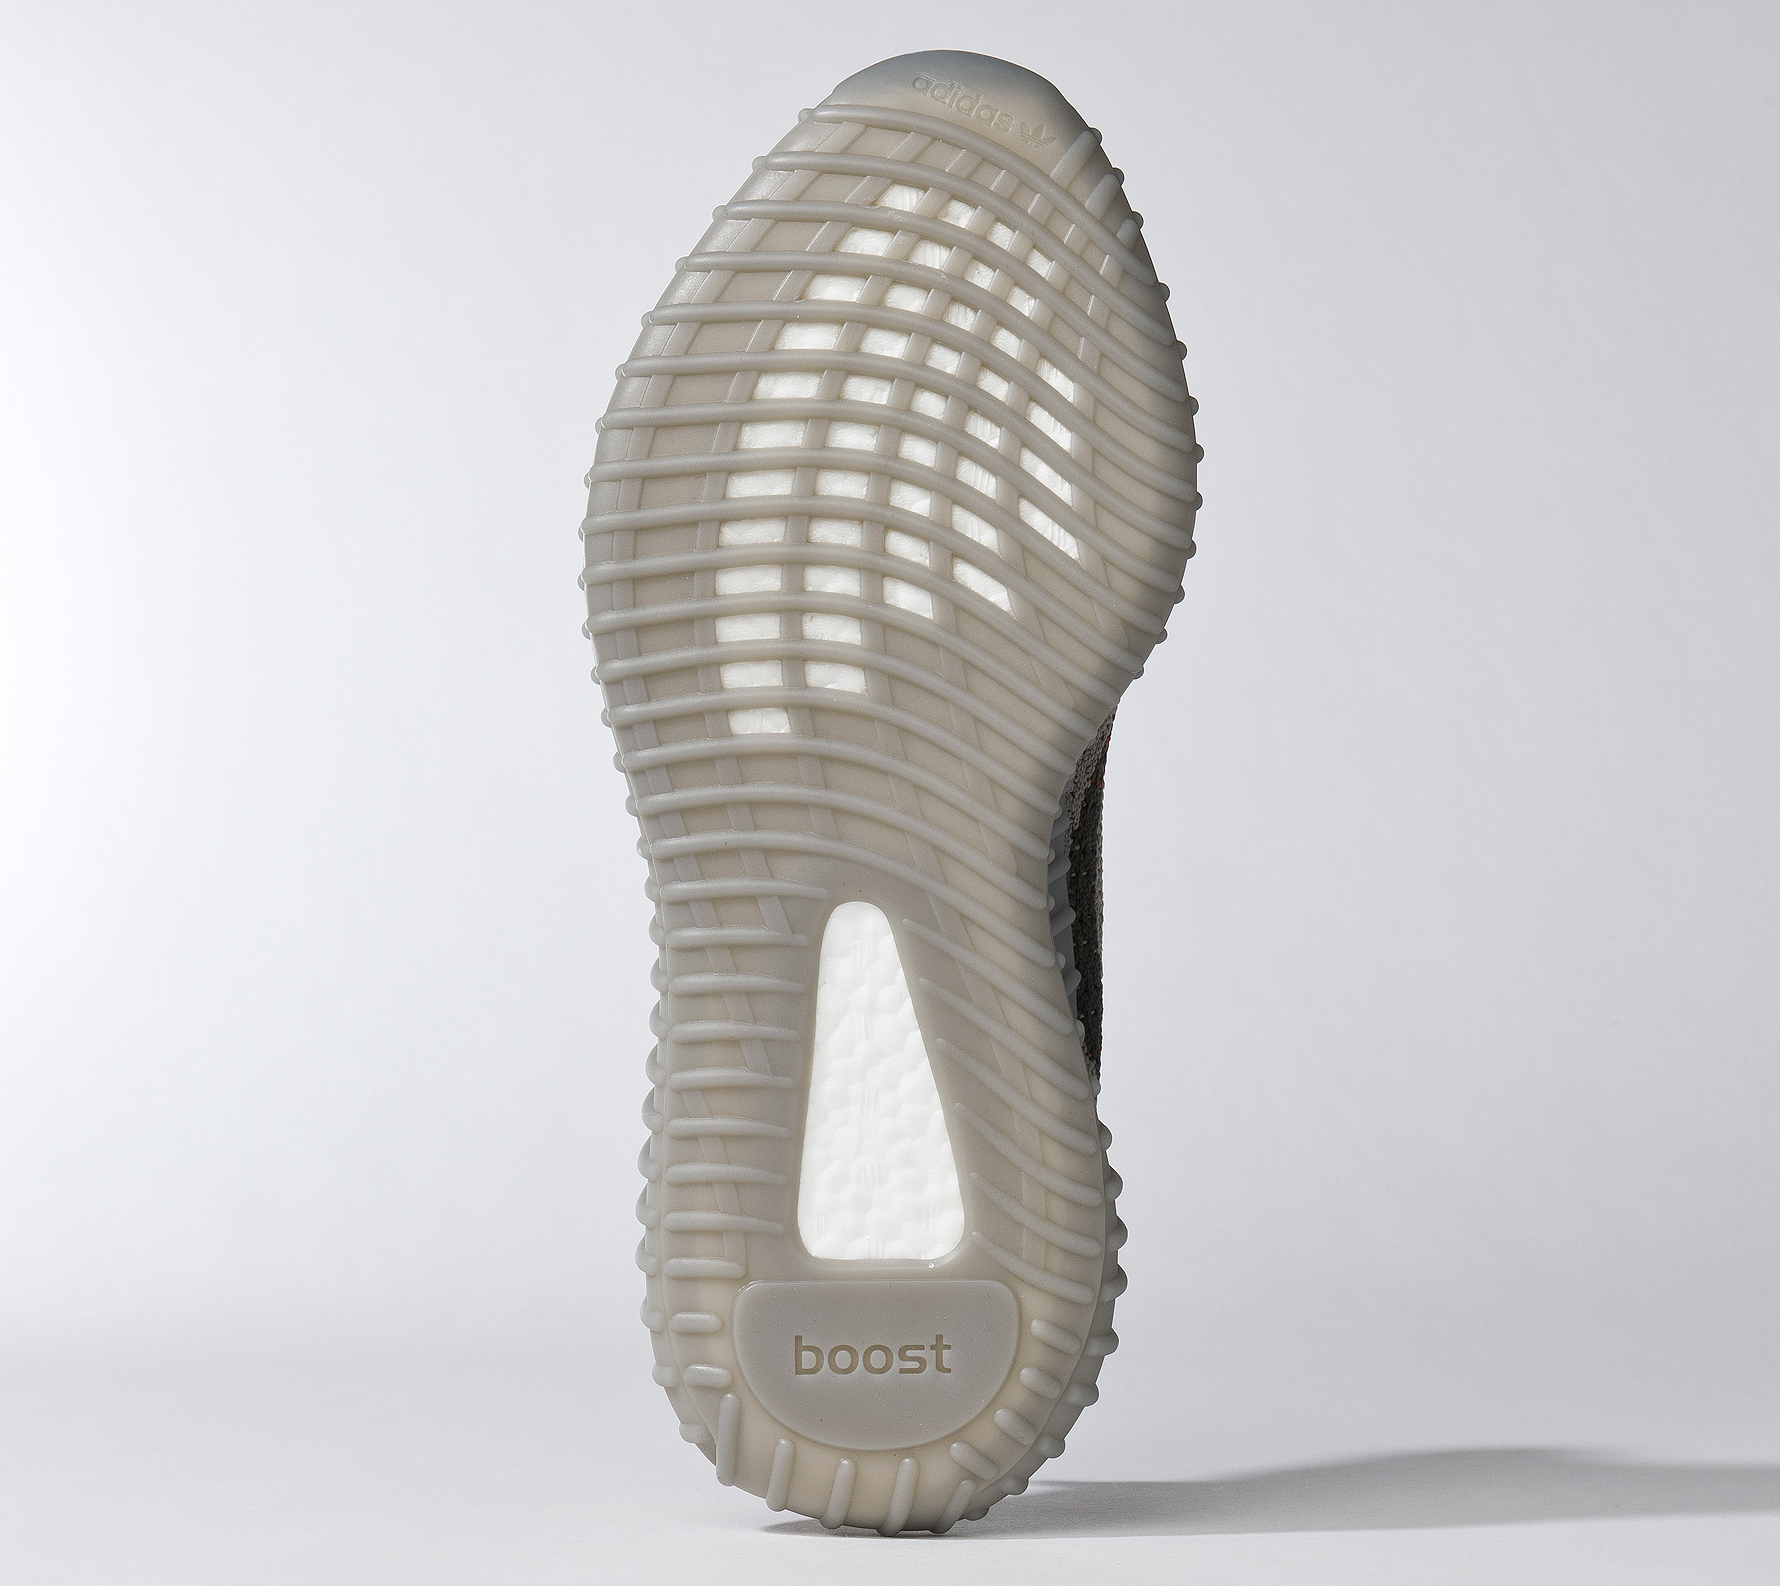 yeezy 350 outsole